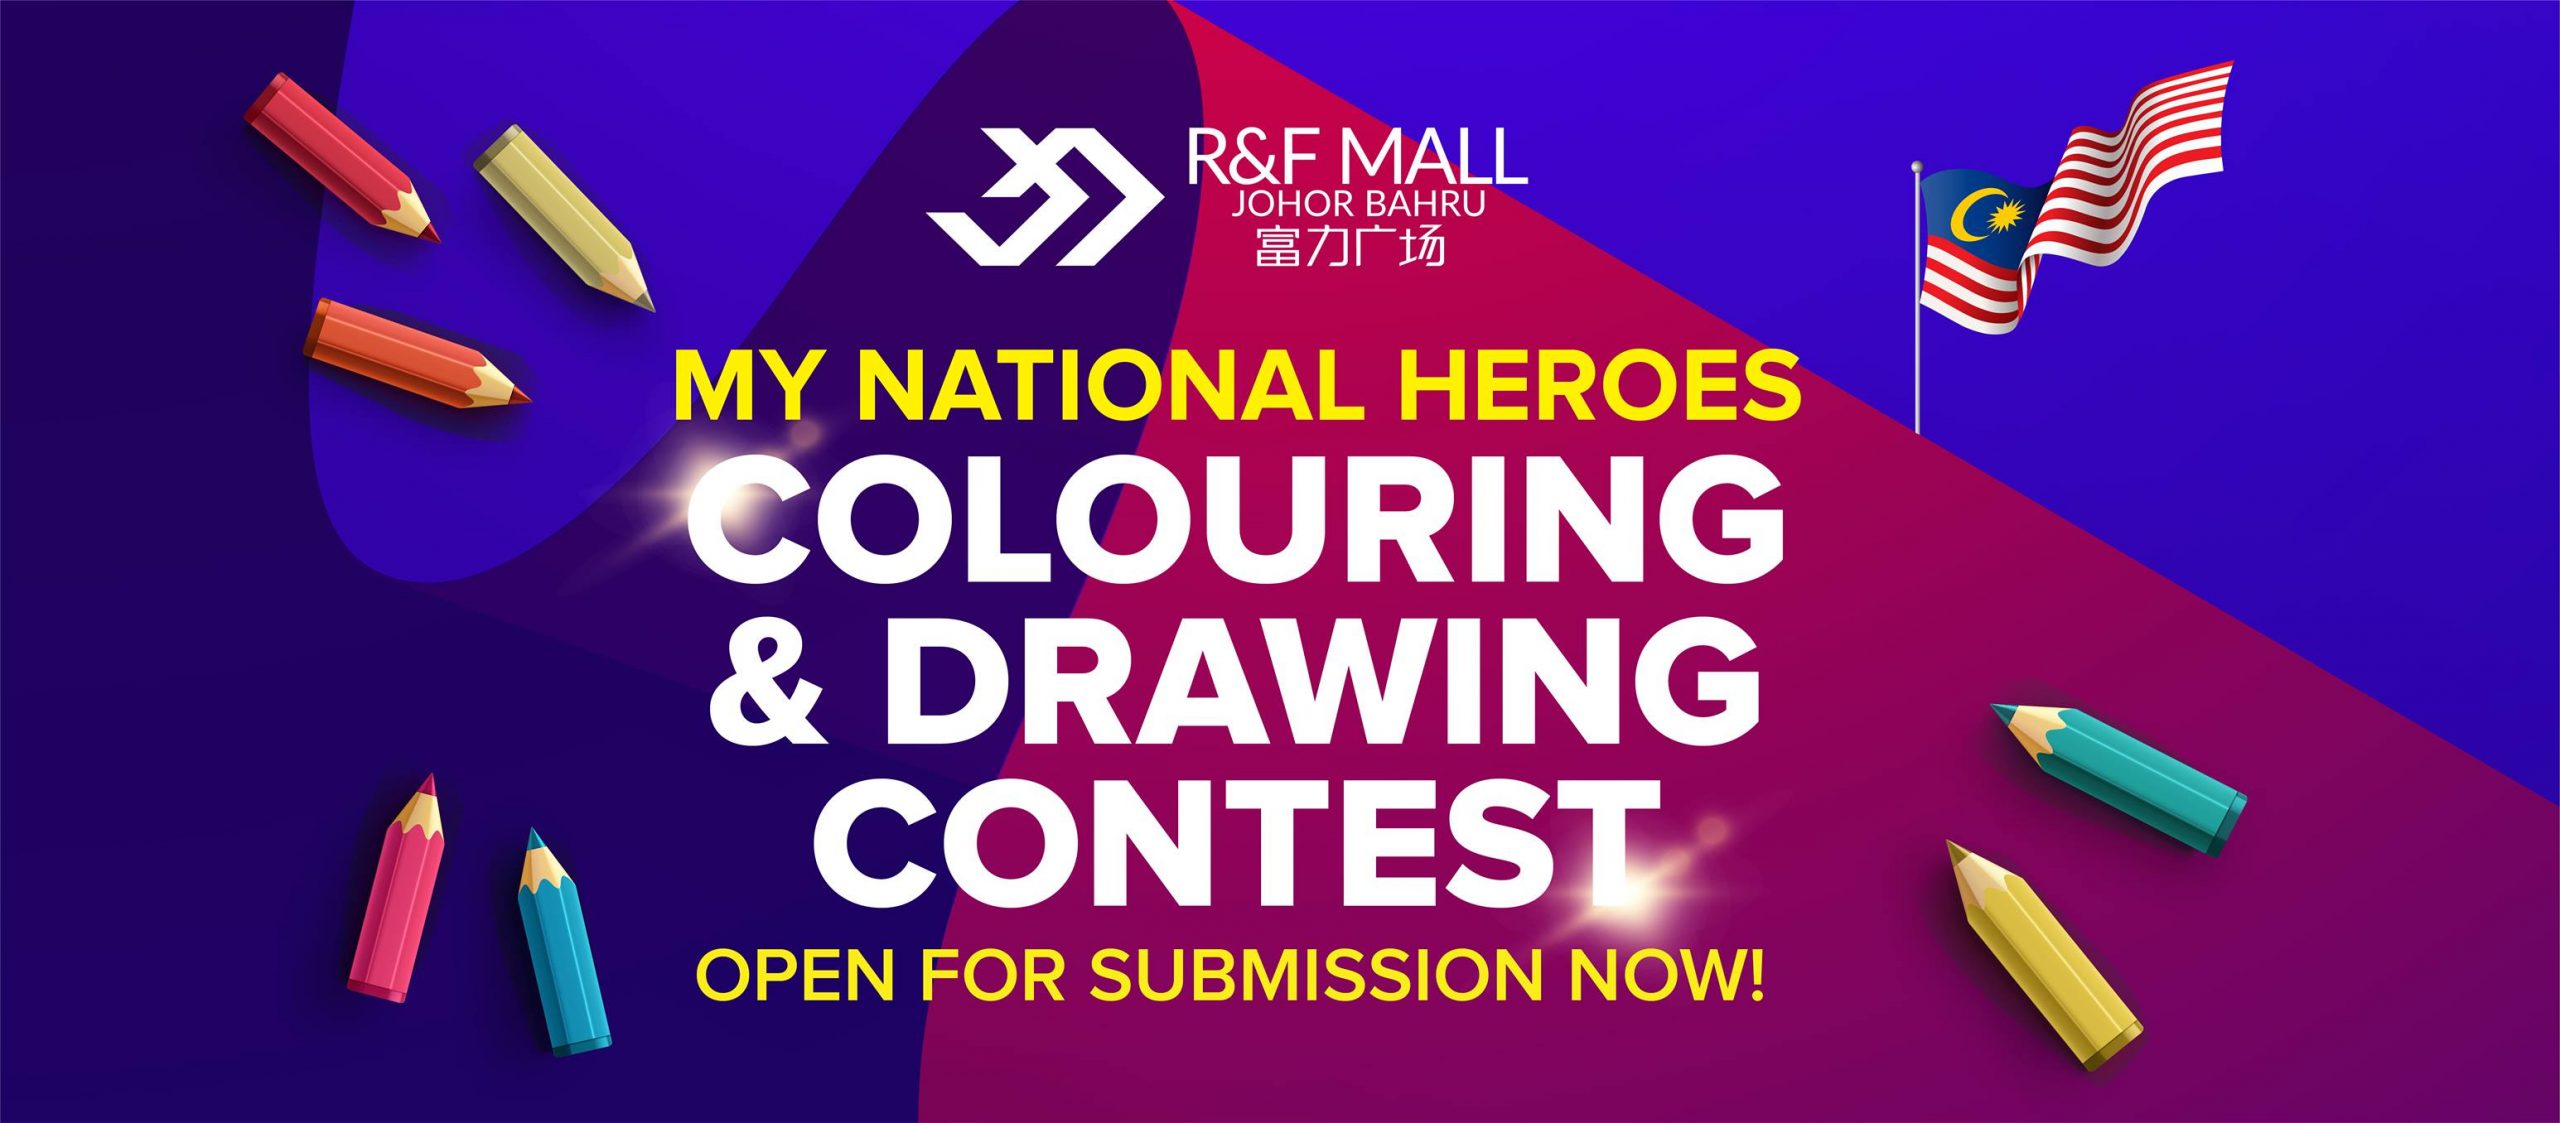 R&F MALL CELEBRATES 63rd NATIONAL DAY BY ORGANIZING ‘MY NATIONAL HEROES’ KIDS DRAWING COMPETITION AND LOCAL ART EXHIBITION